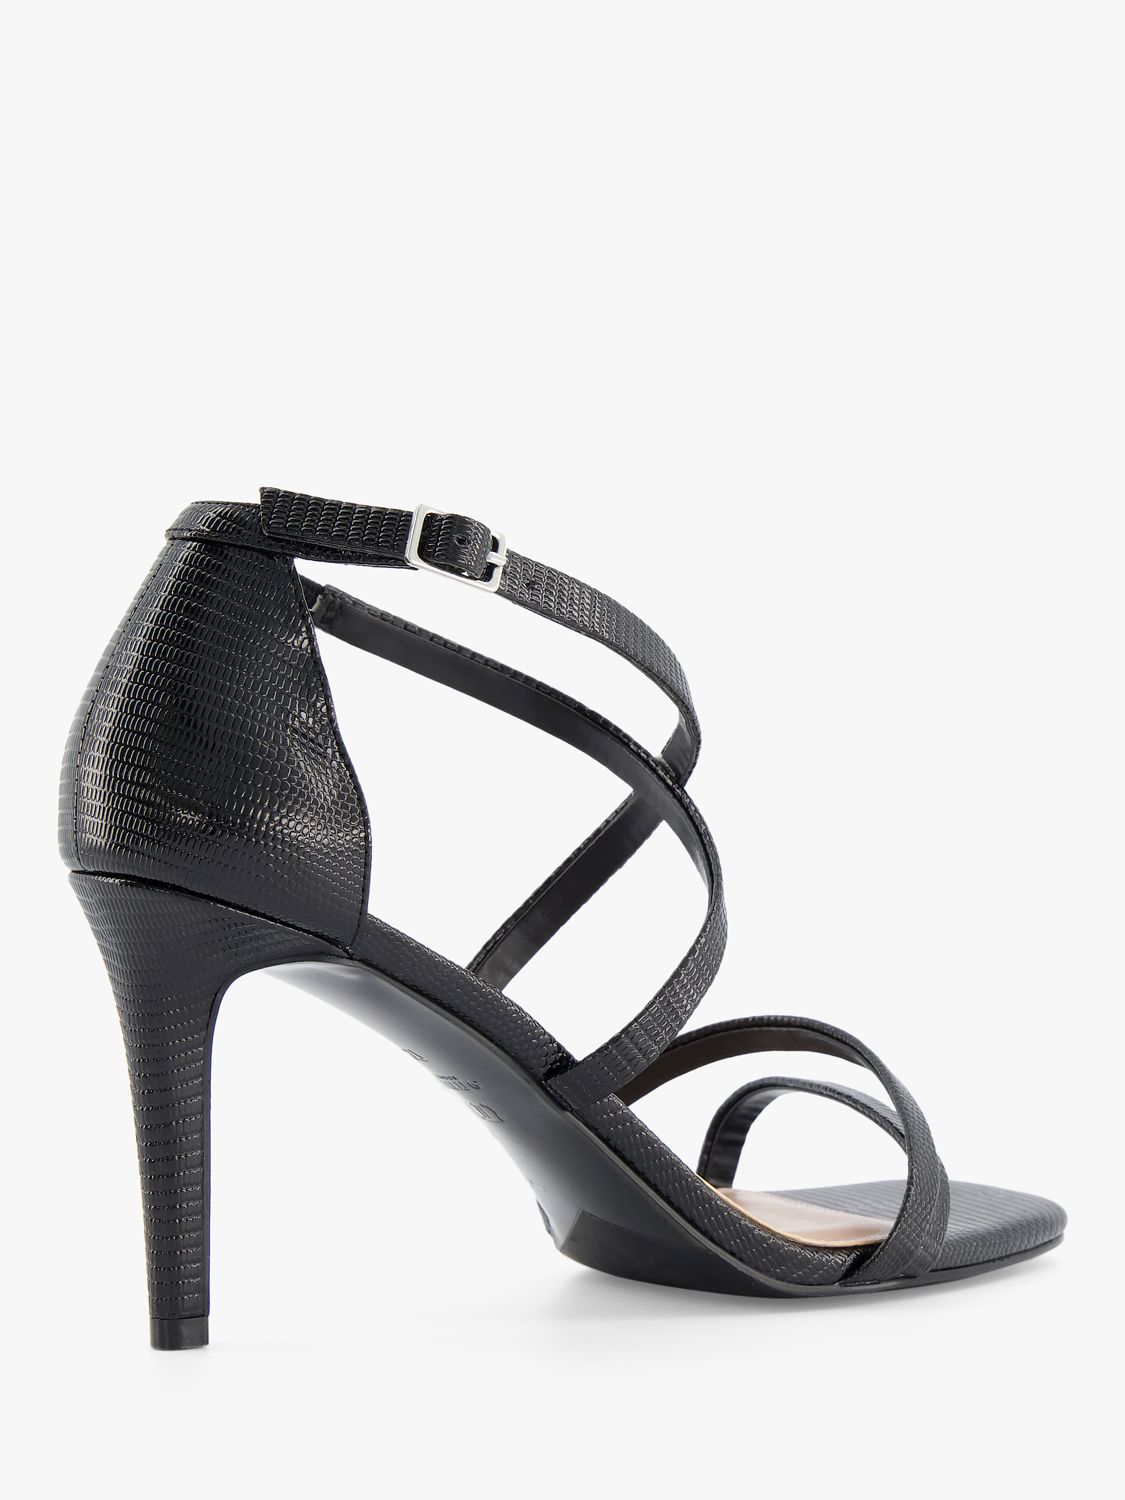 Dune Musical Strappy Stiletto Heel Sandals, Black at John Lewis & Partners